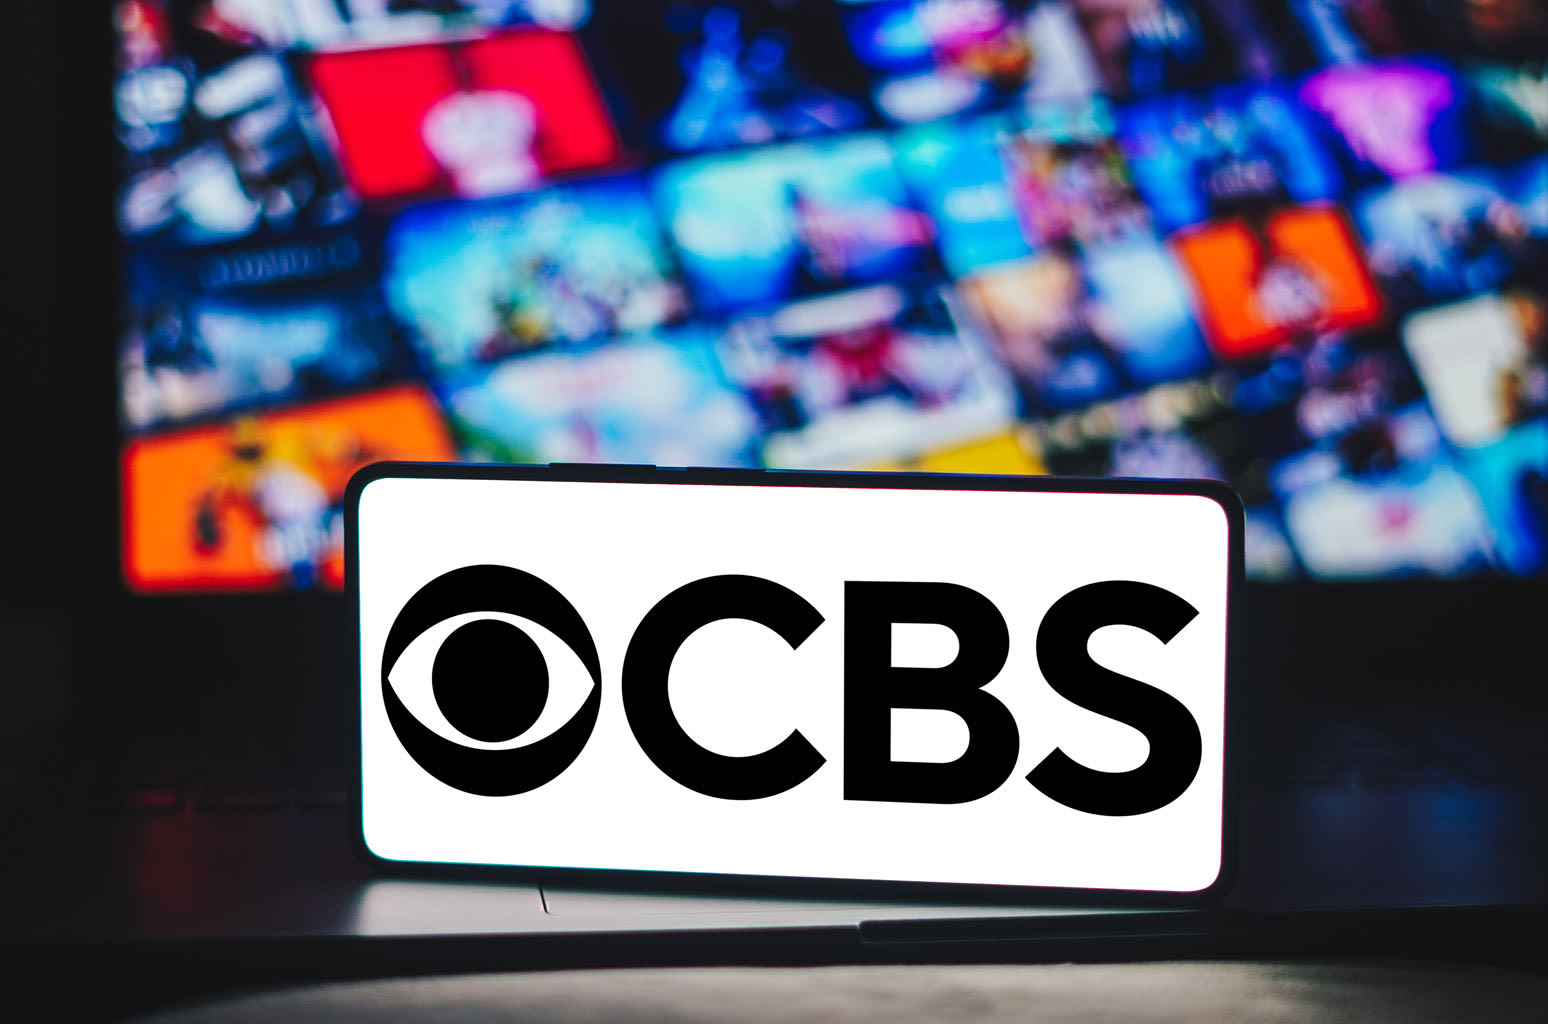 How to Watch CBS Online Without Cable to Livestream PGA, WNBA, NFL Games & More